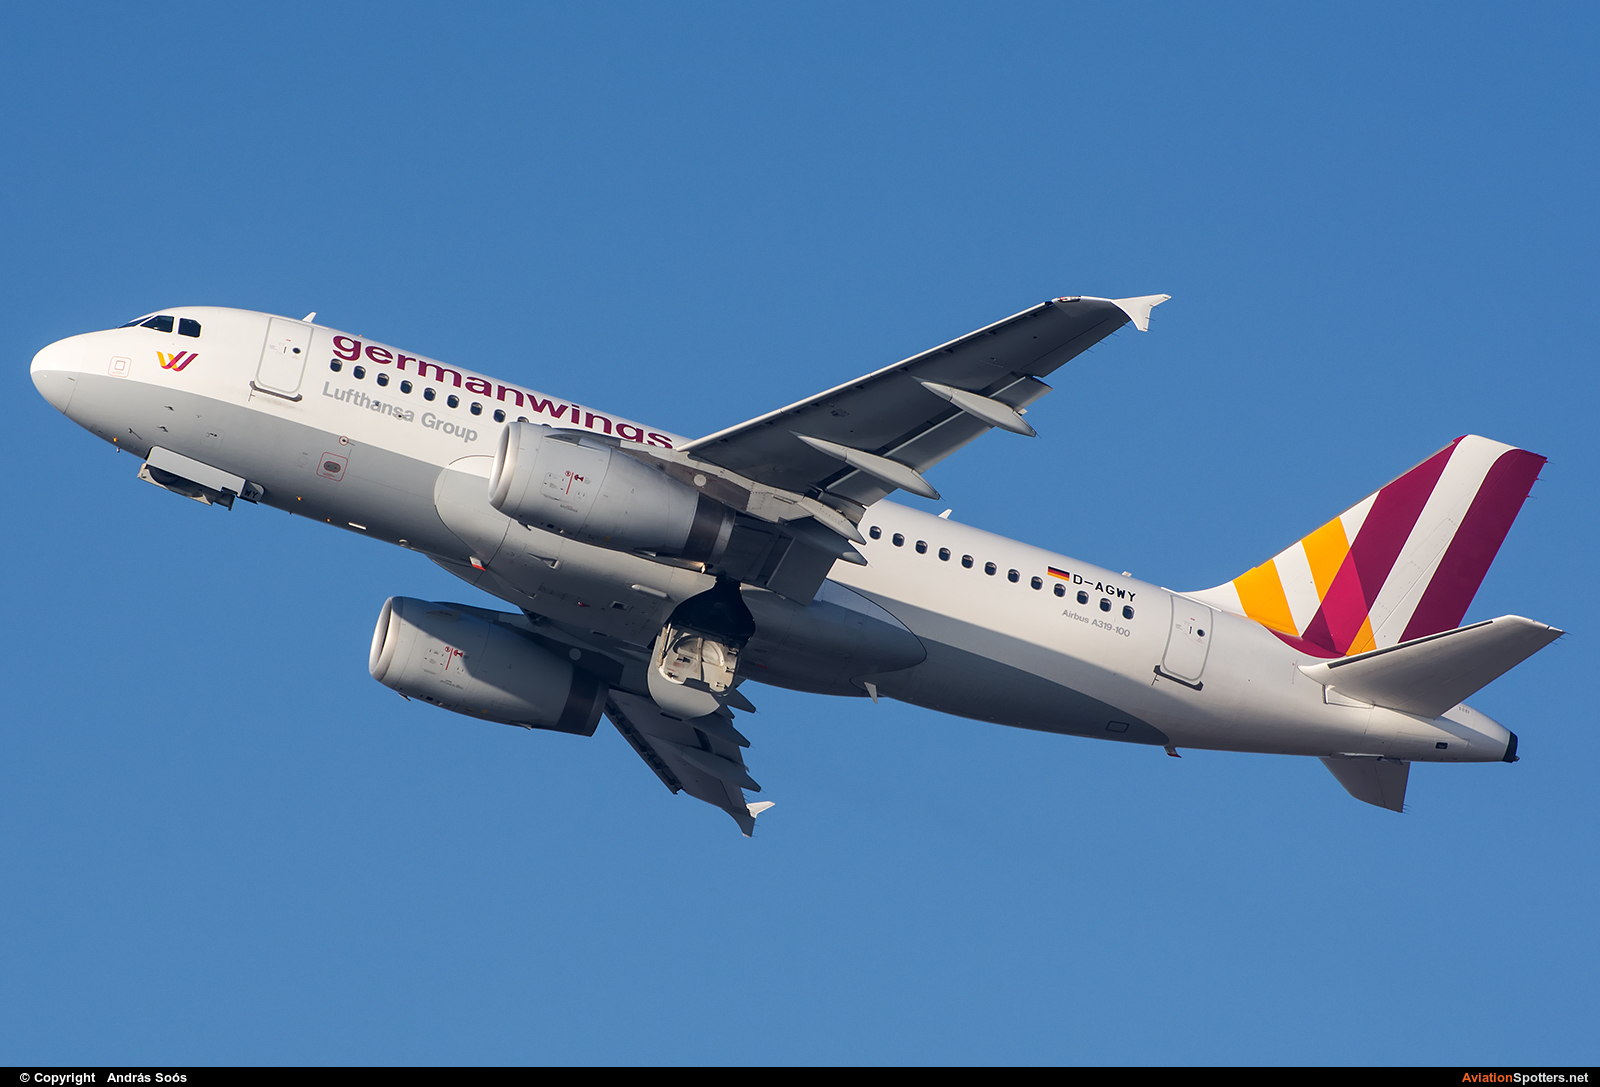 Germanwings  -  A319  (D-AGWY) By András Soós (sas1965)